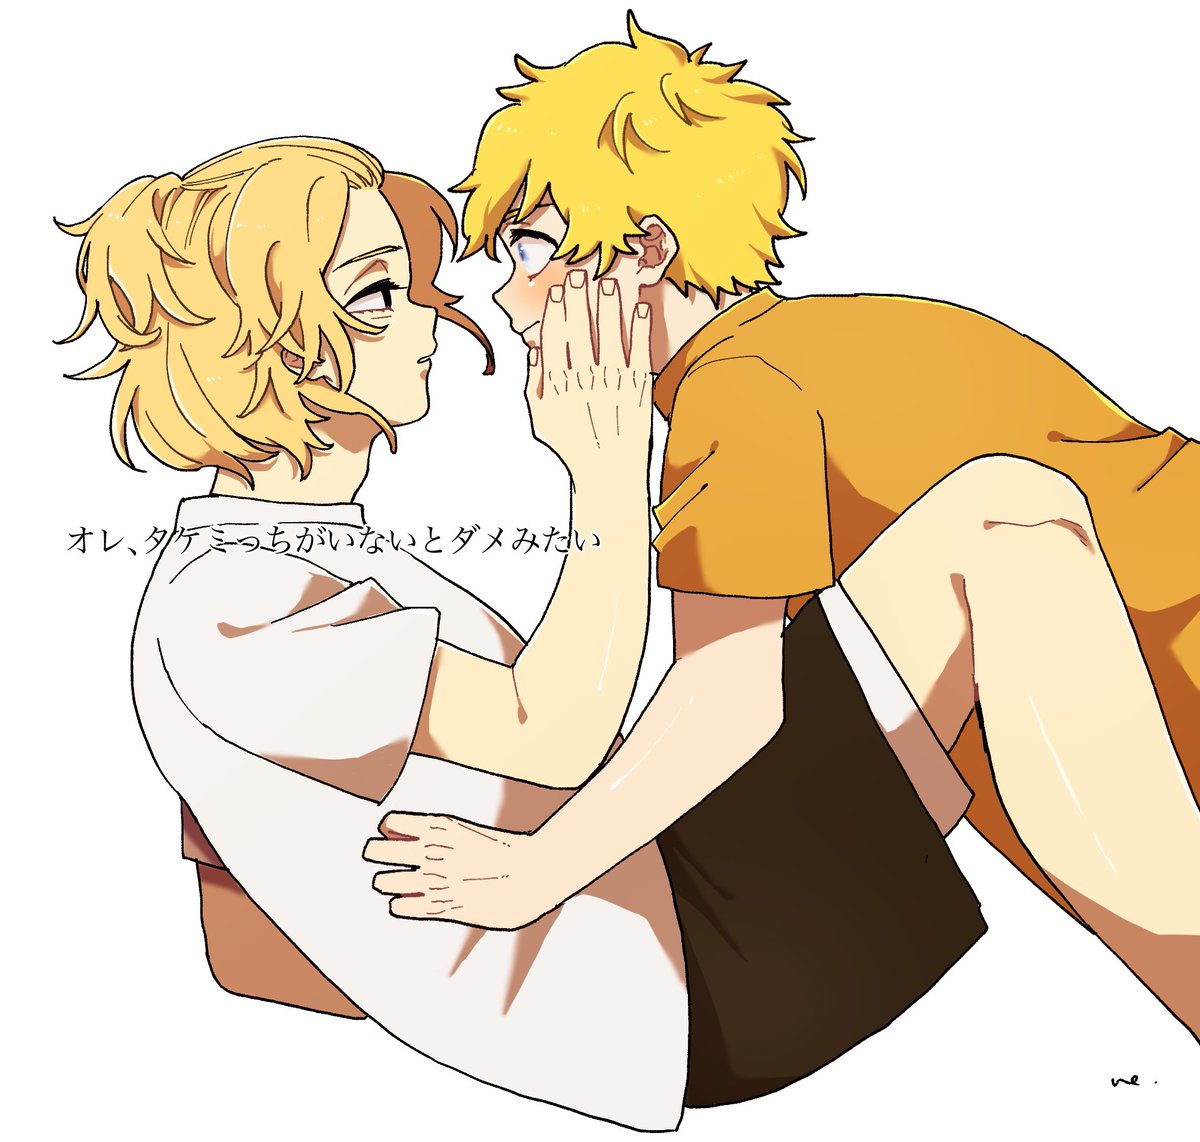 blonde hair shirt multiple boys shorts looking at another 2boys white background  illustration images